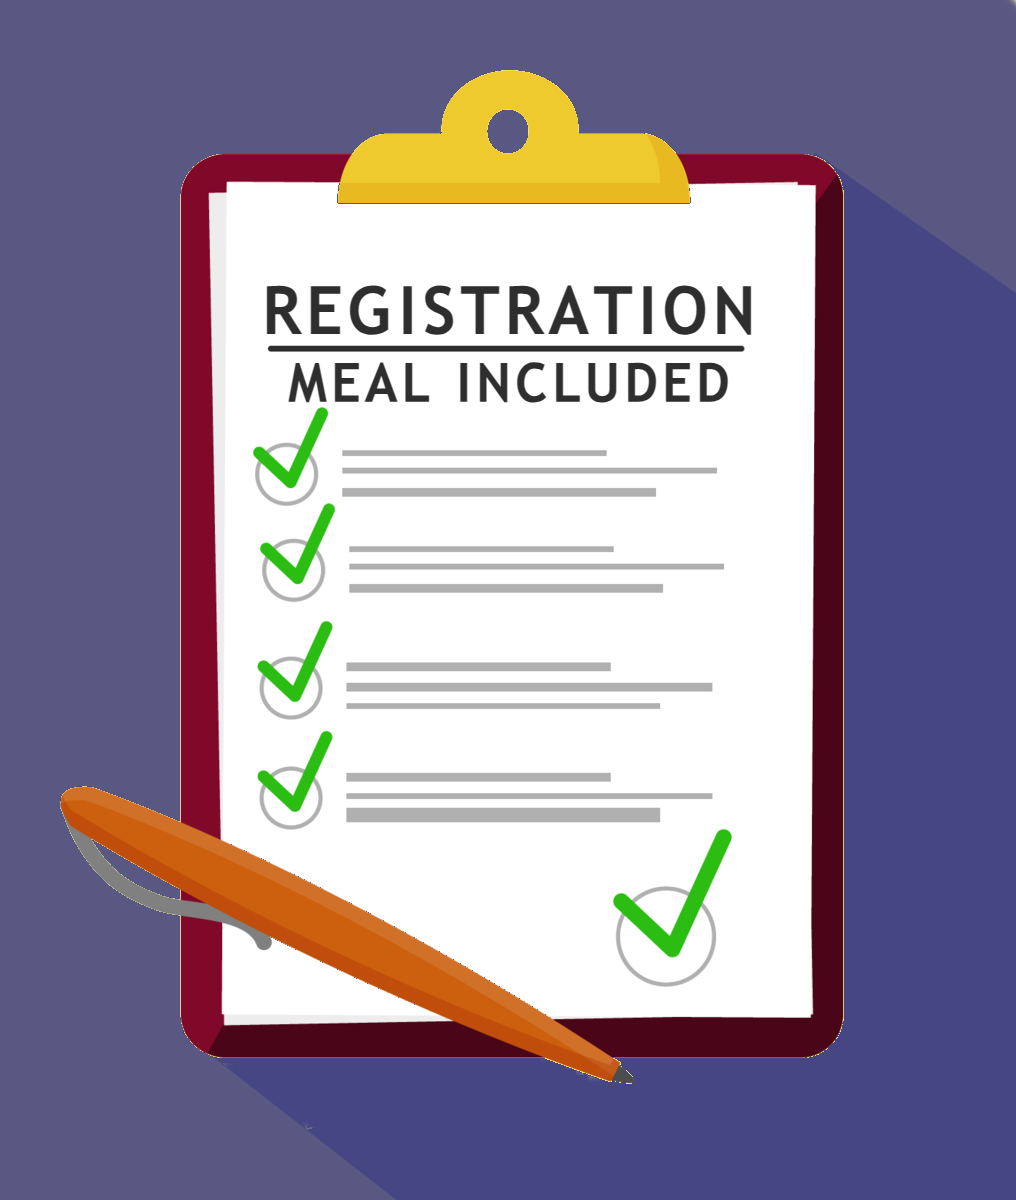 Meeting Registration w/ Meal Included (PAY NOW)